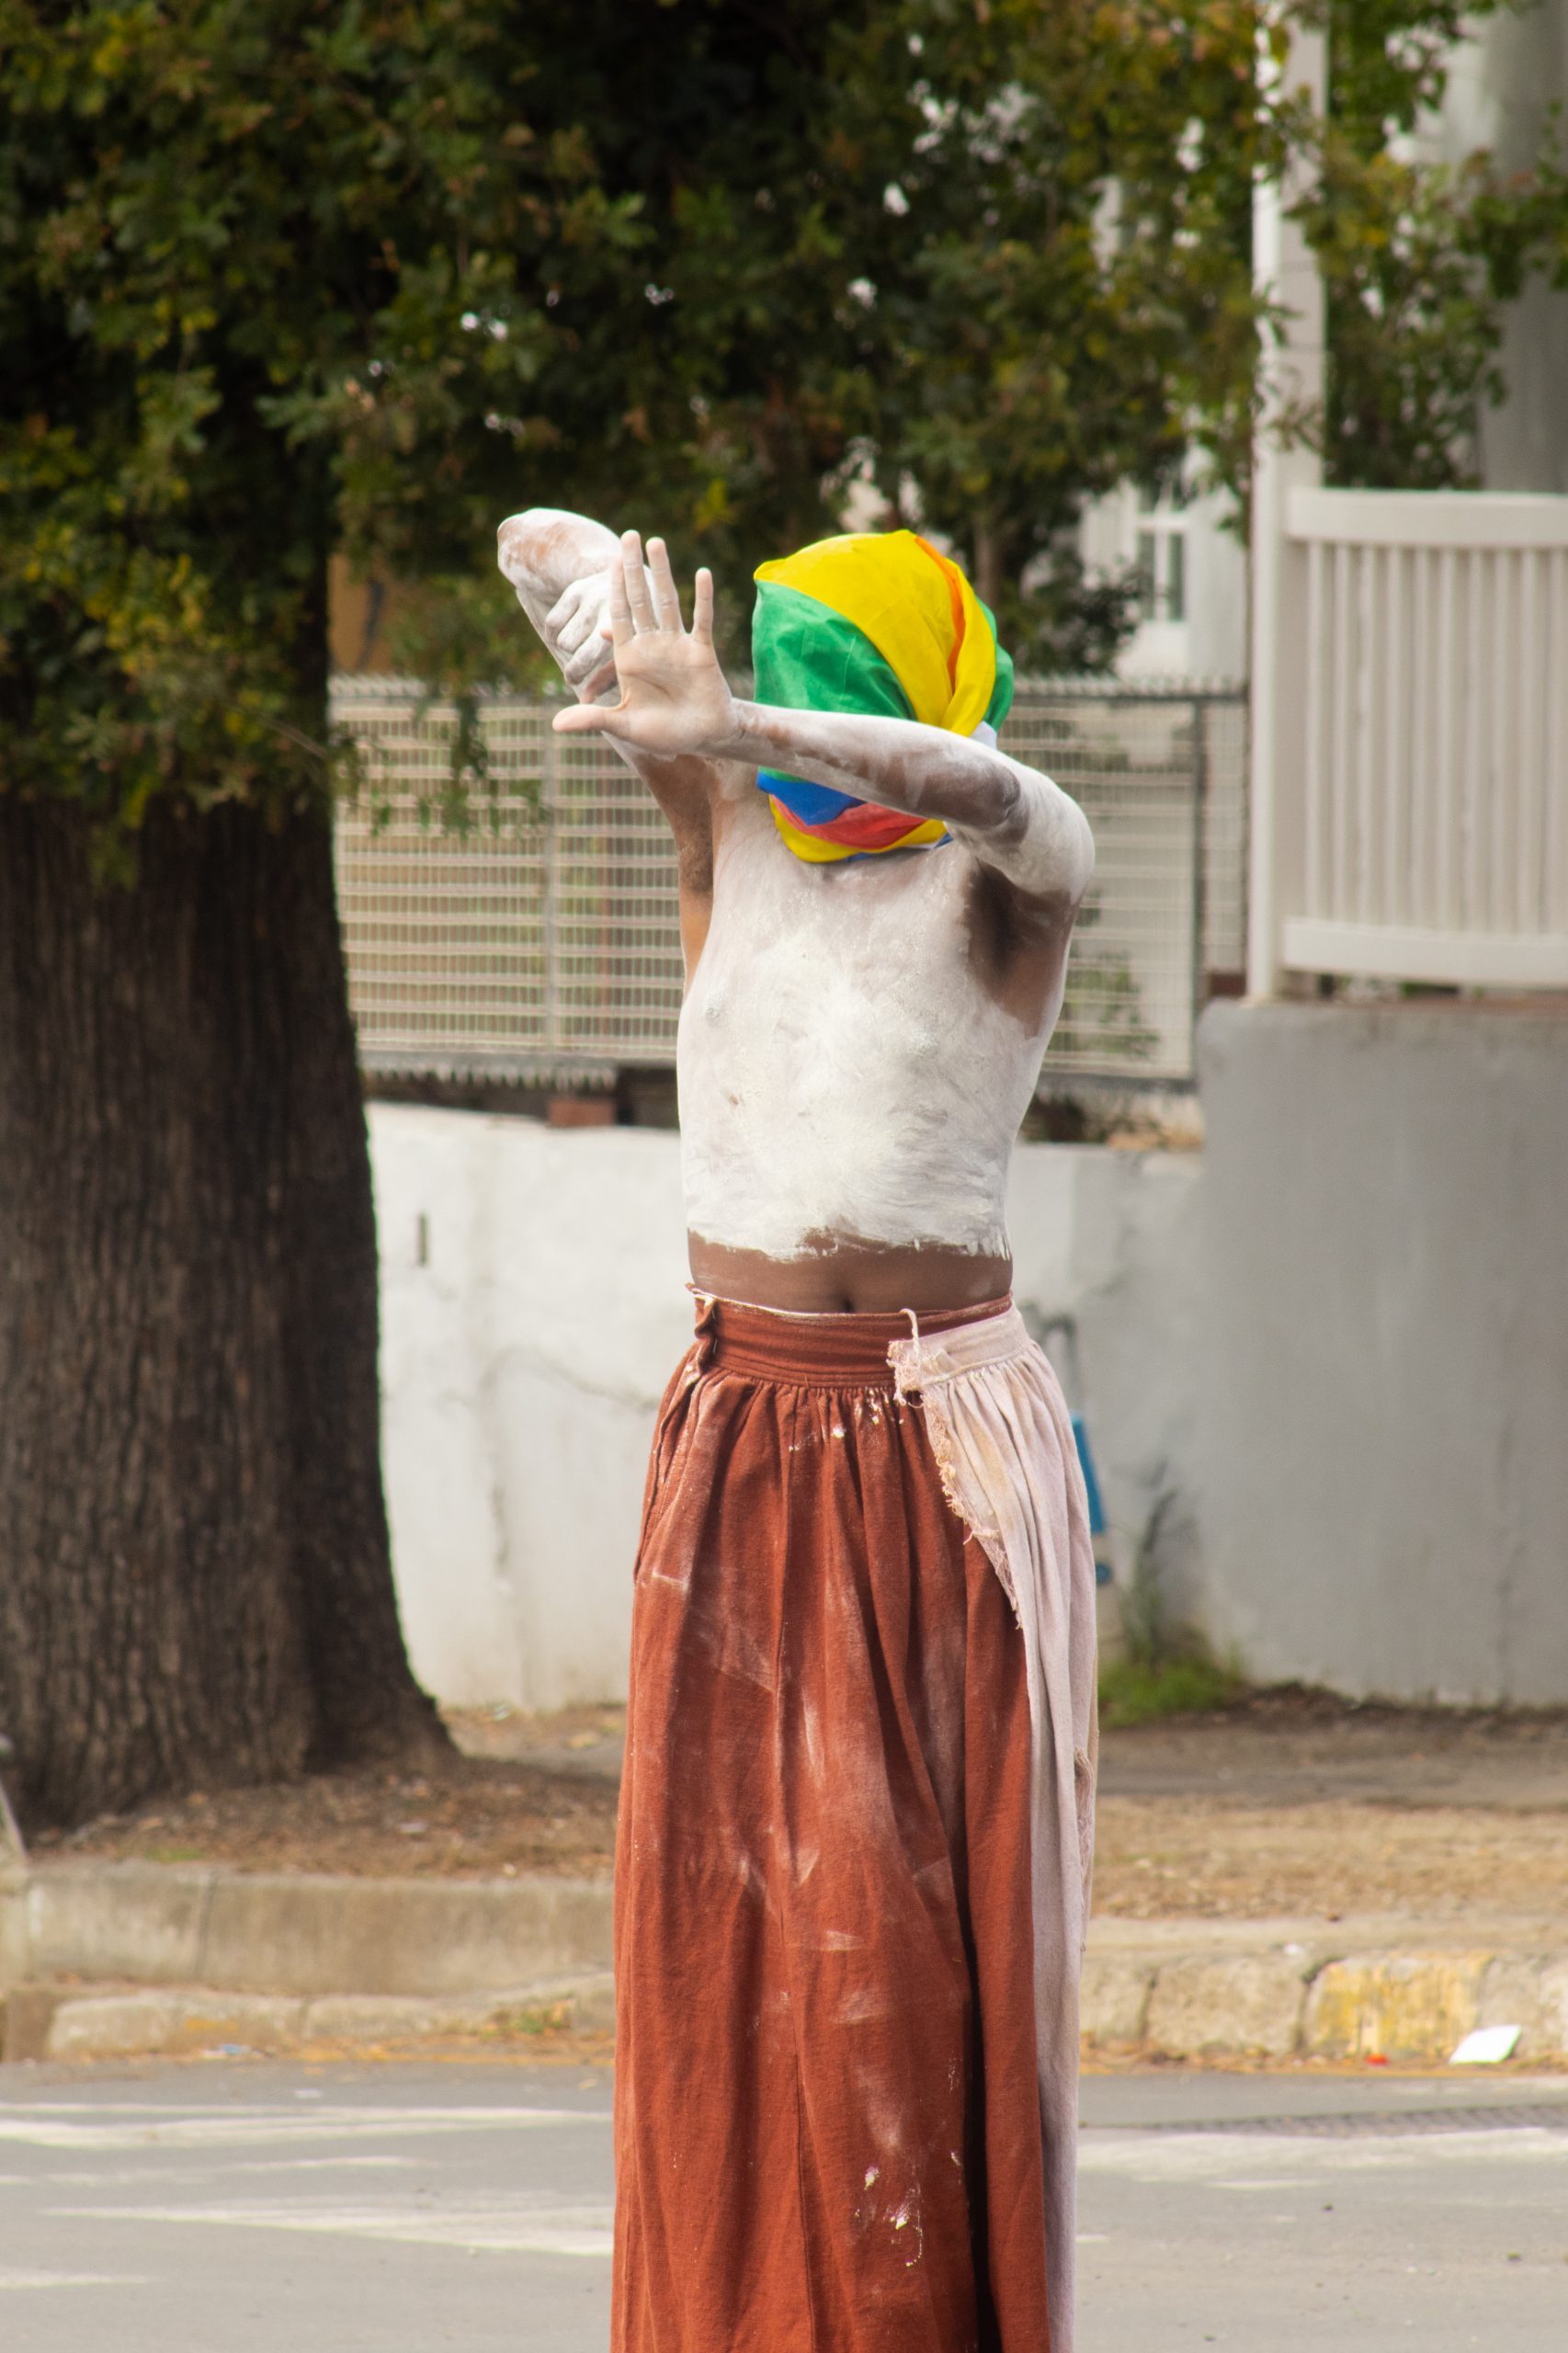 Sange Mpambani performing an intervention at the intersection of African Street and Somerset street photo by Rikie Lai